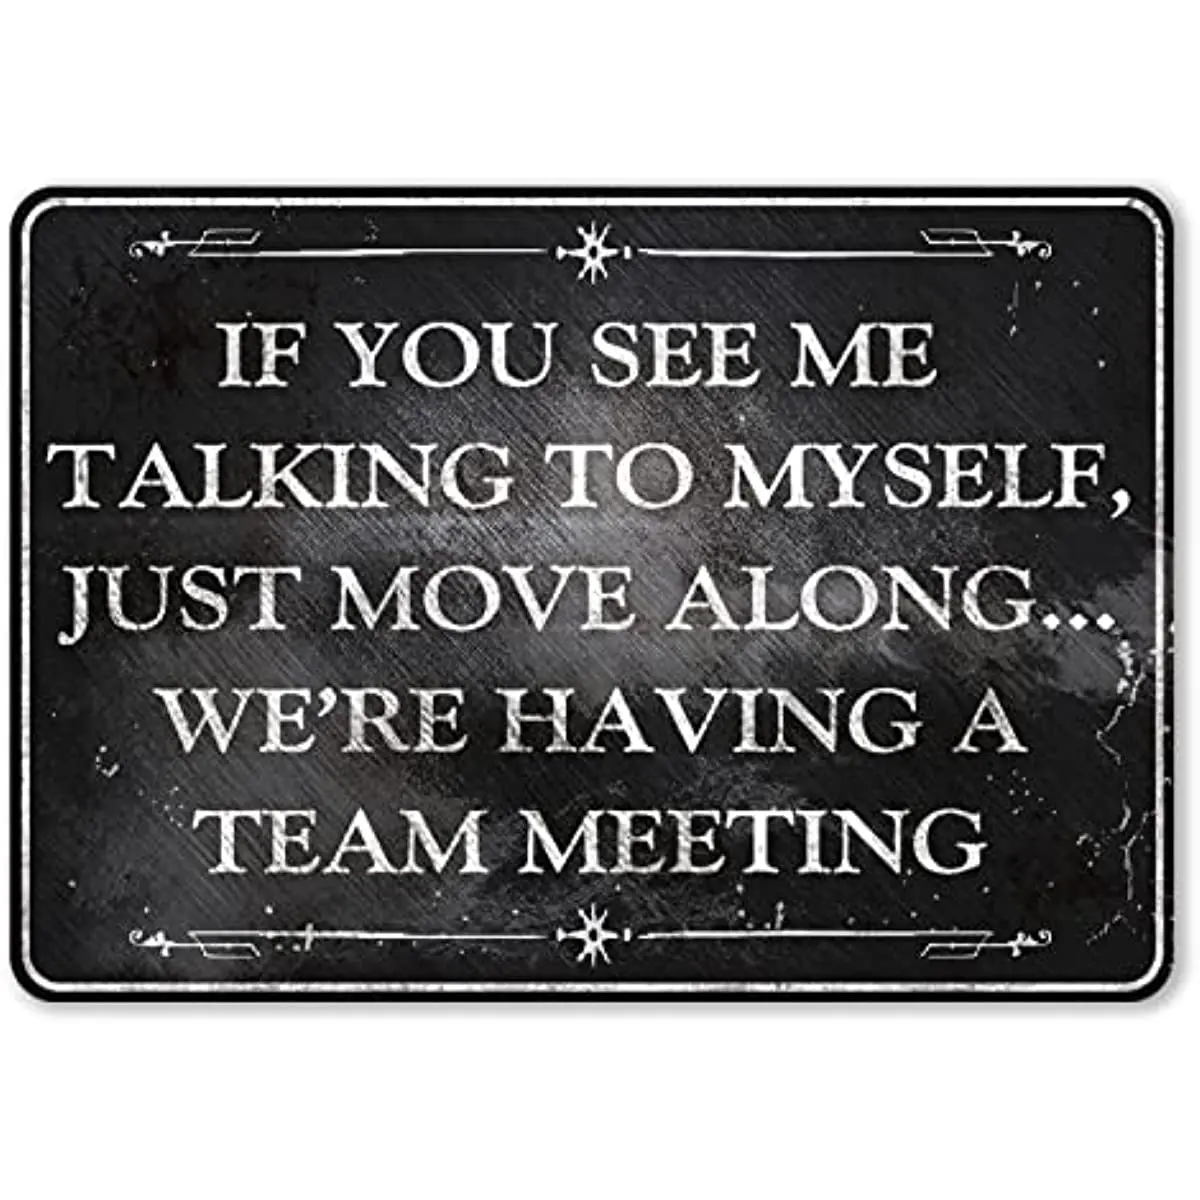 

New Funny Office Metal Tin Sign If You See Me Talking To Myself We're Having A Team Meeting Humor Wall Art Decor Decor Gifts